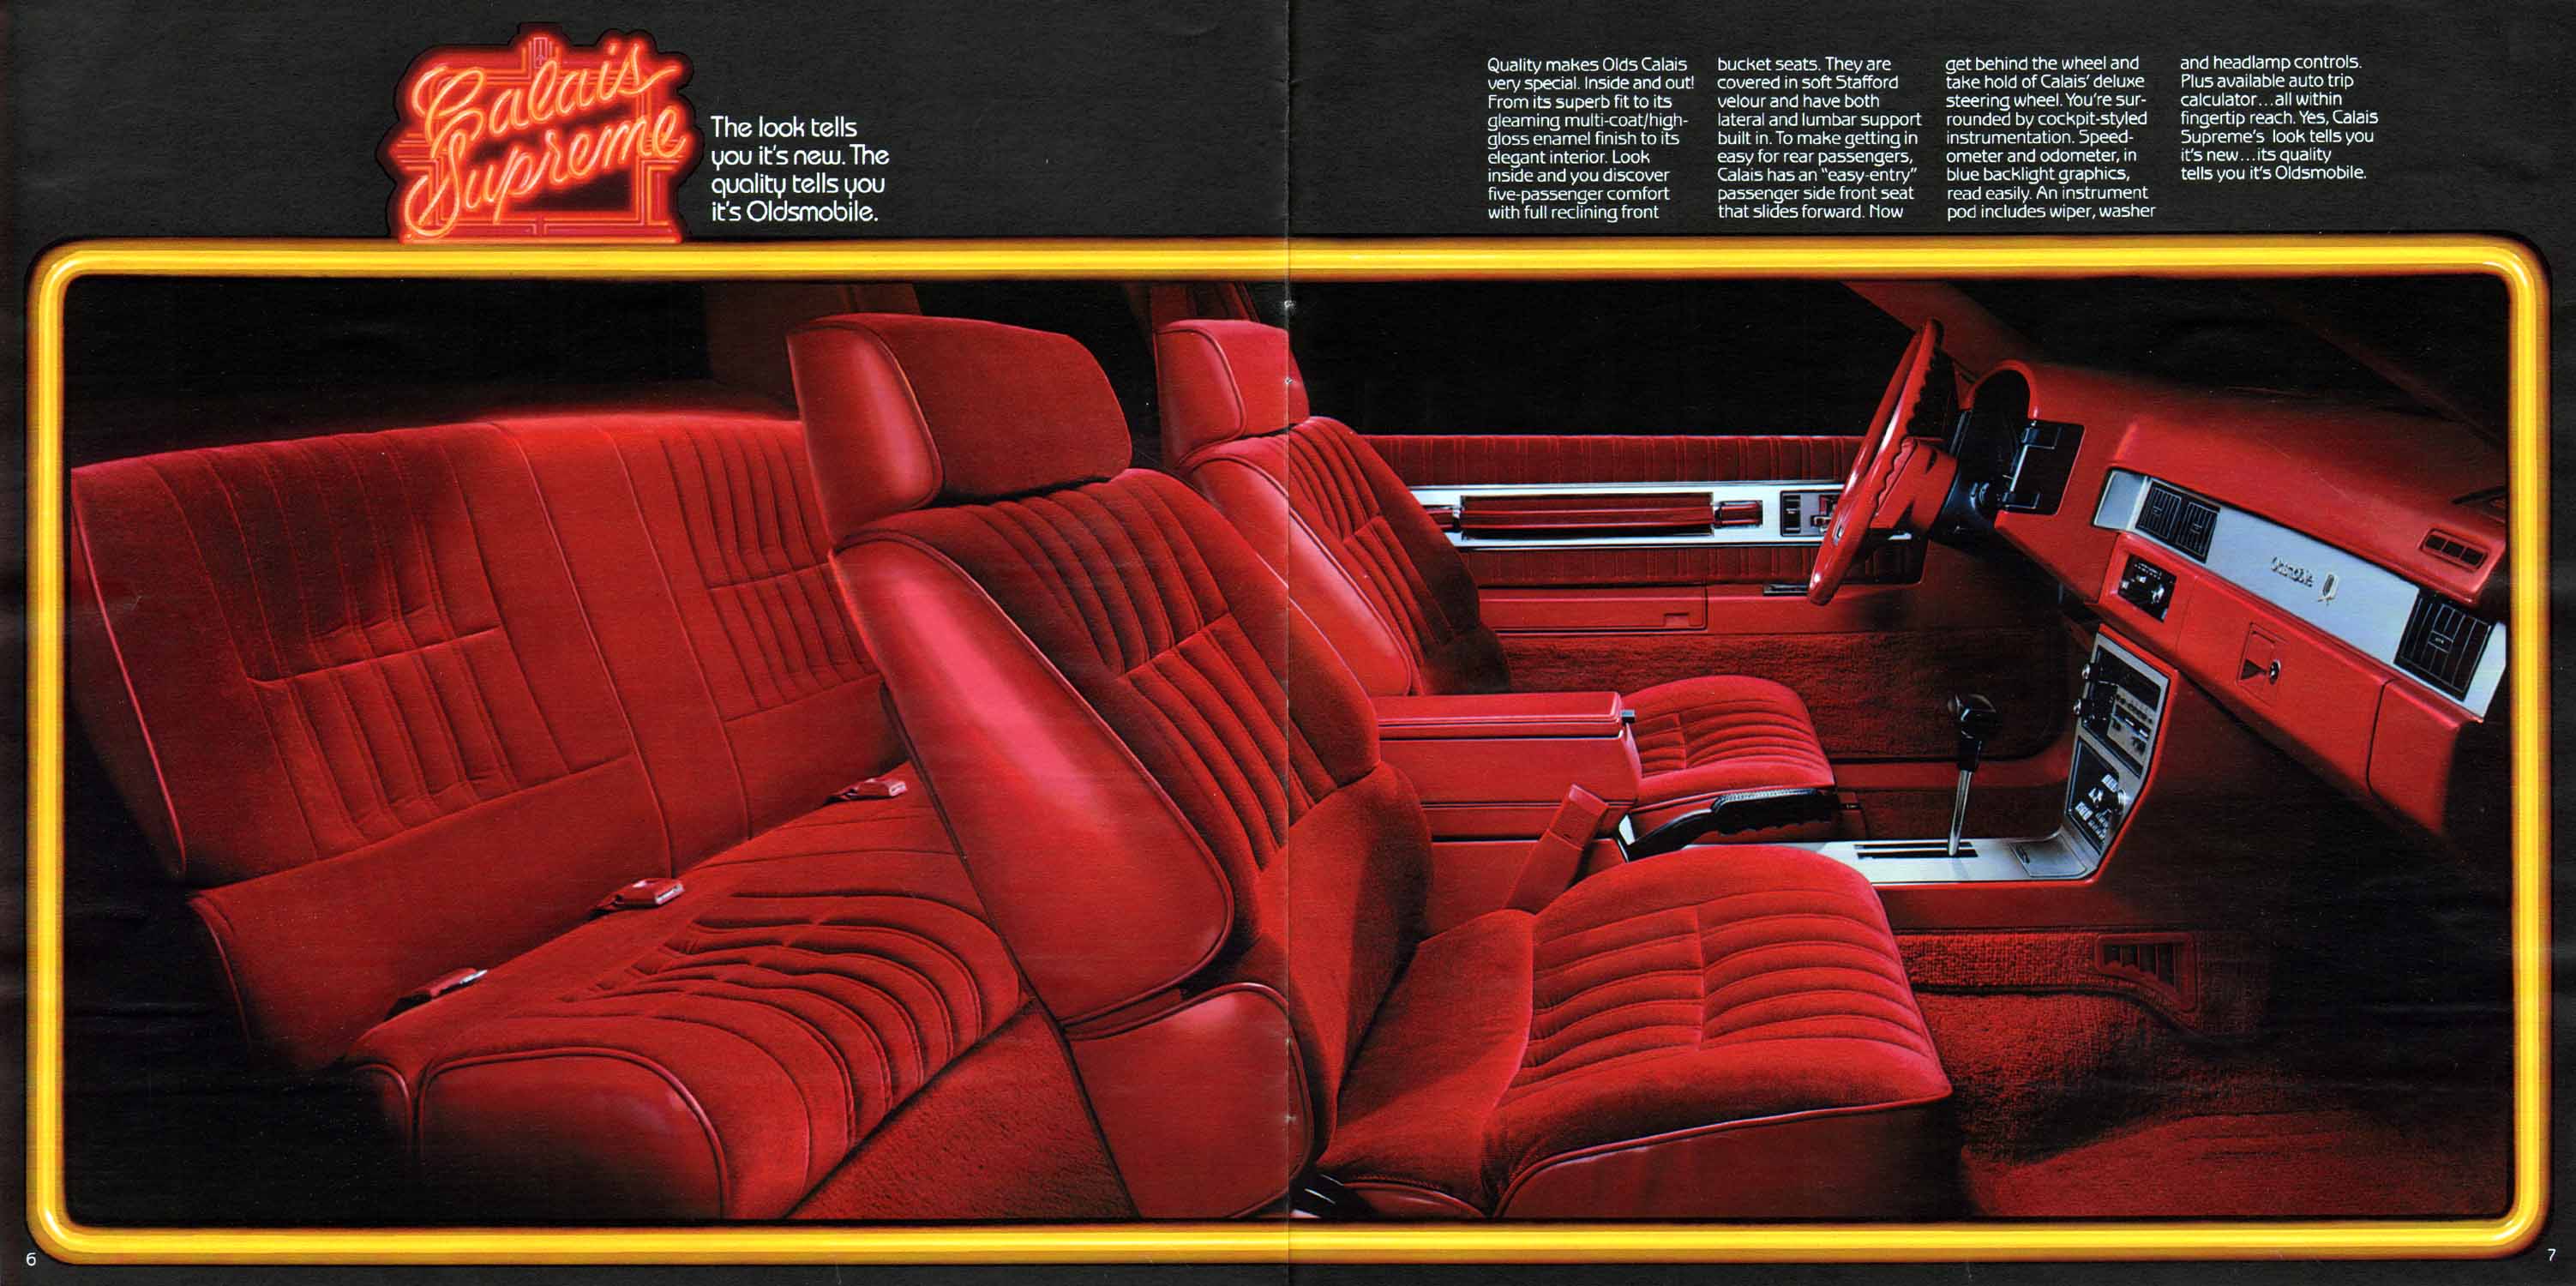 1985 Oldsmobile Small Size-06-07